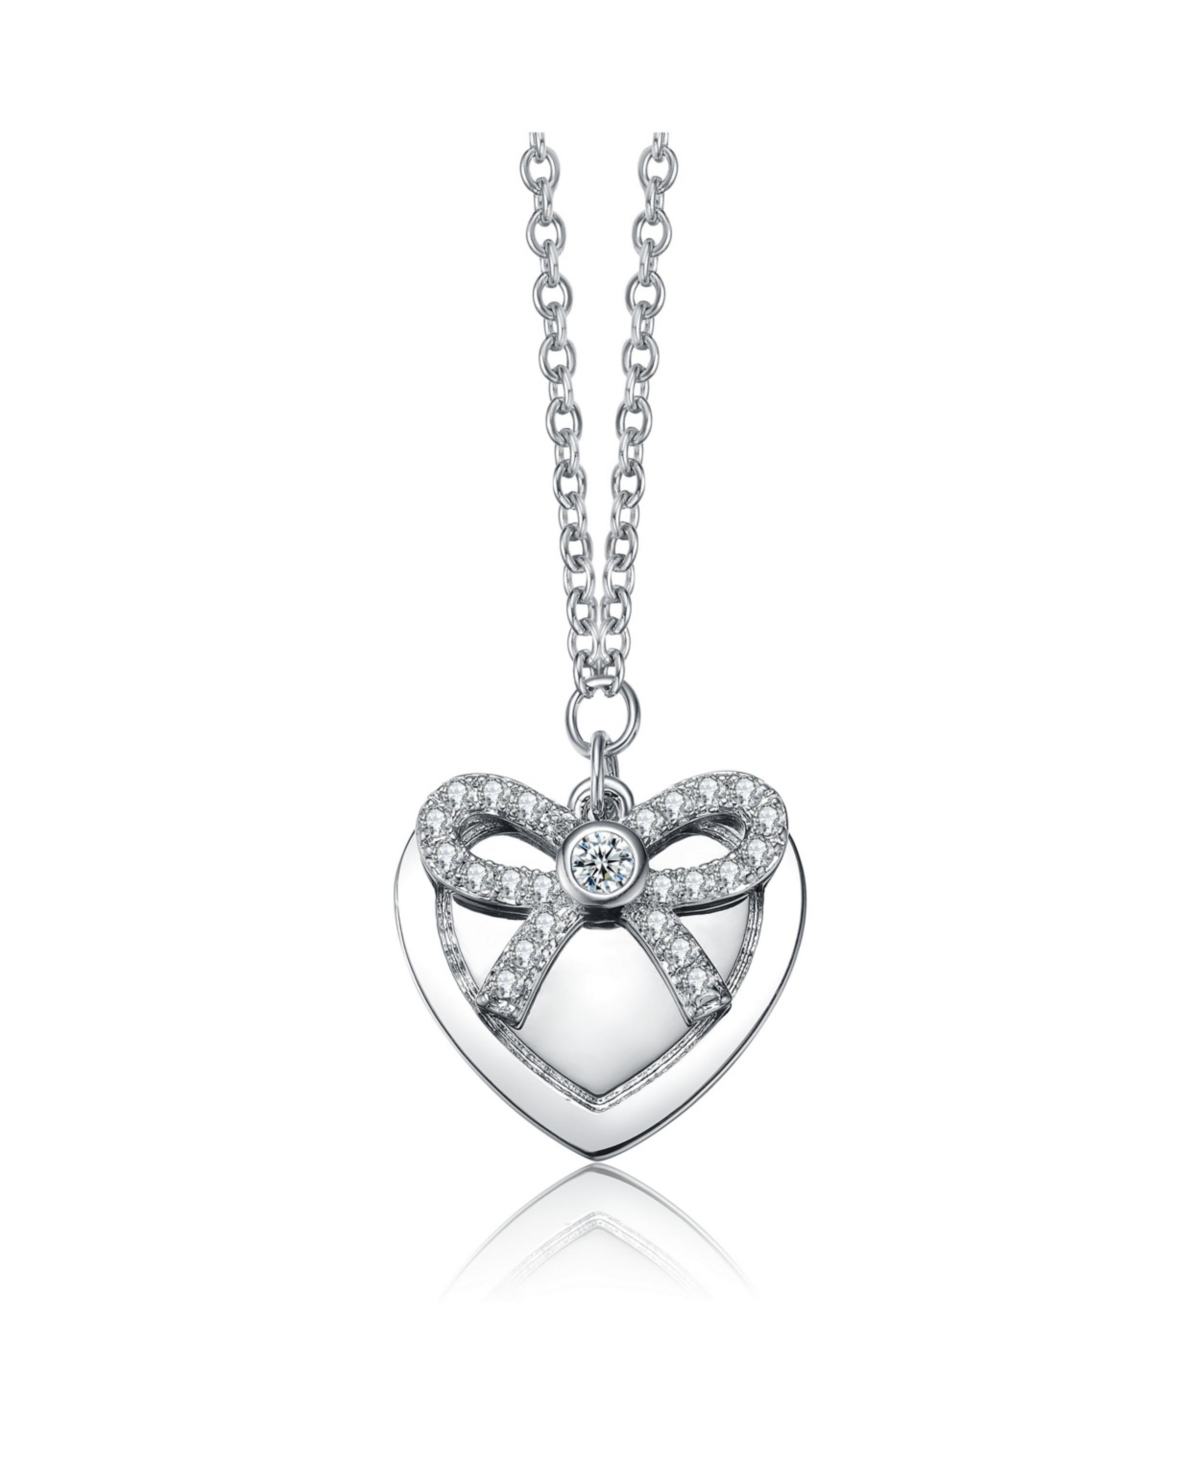 RACHEL GLAUBER CHIC WHITE GOLD PLATED TIE RIBBON ON HEART SHAPED PENDANT